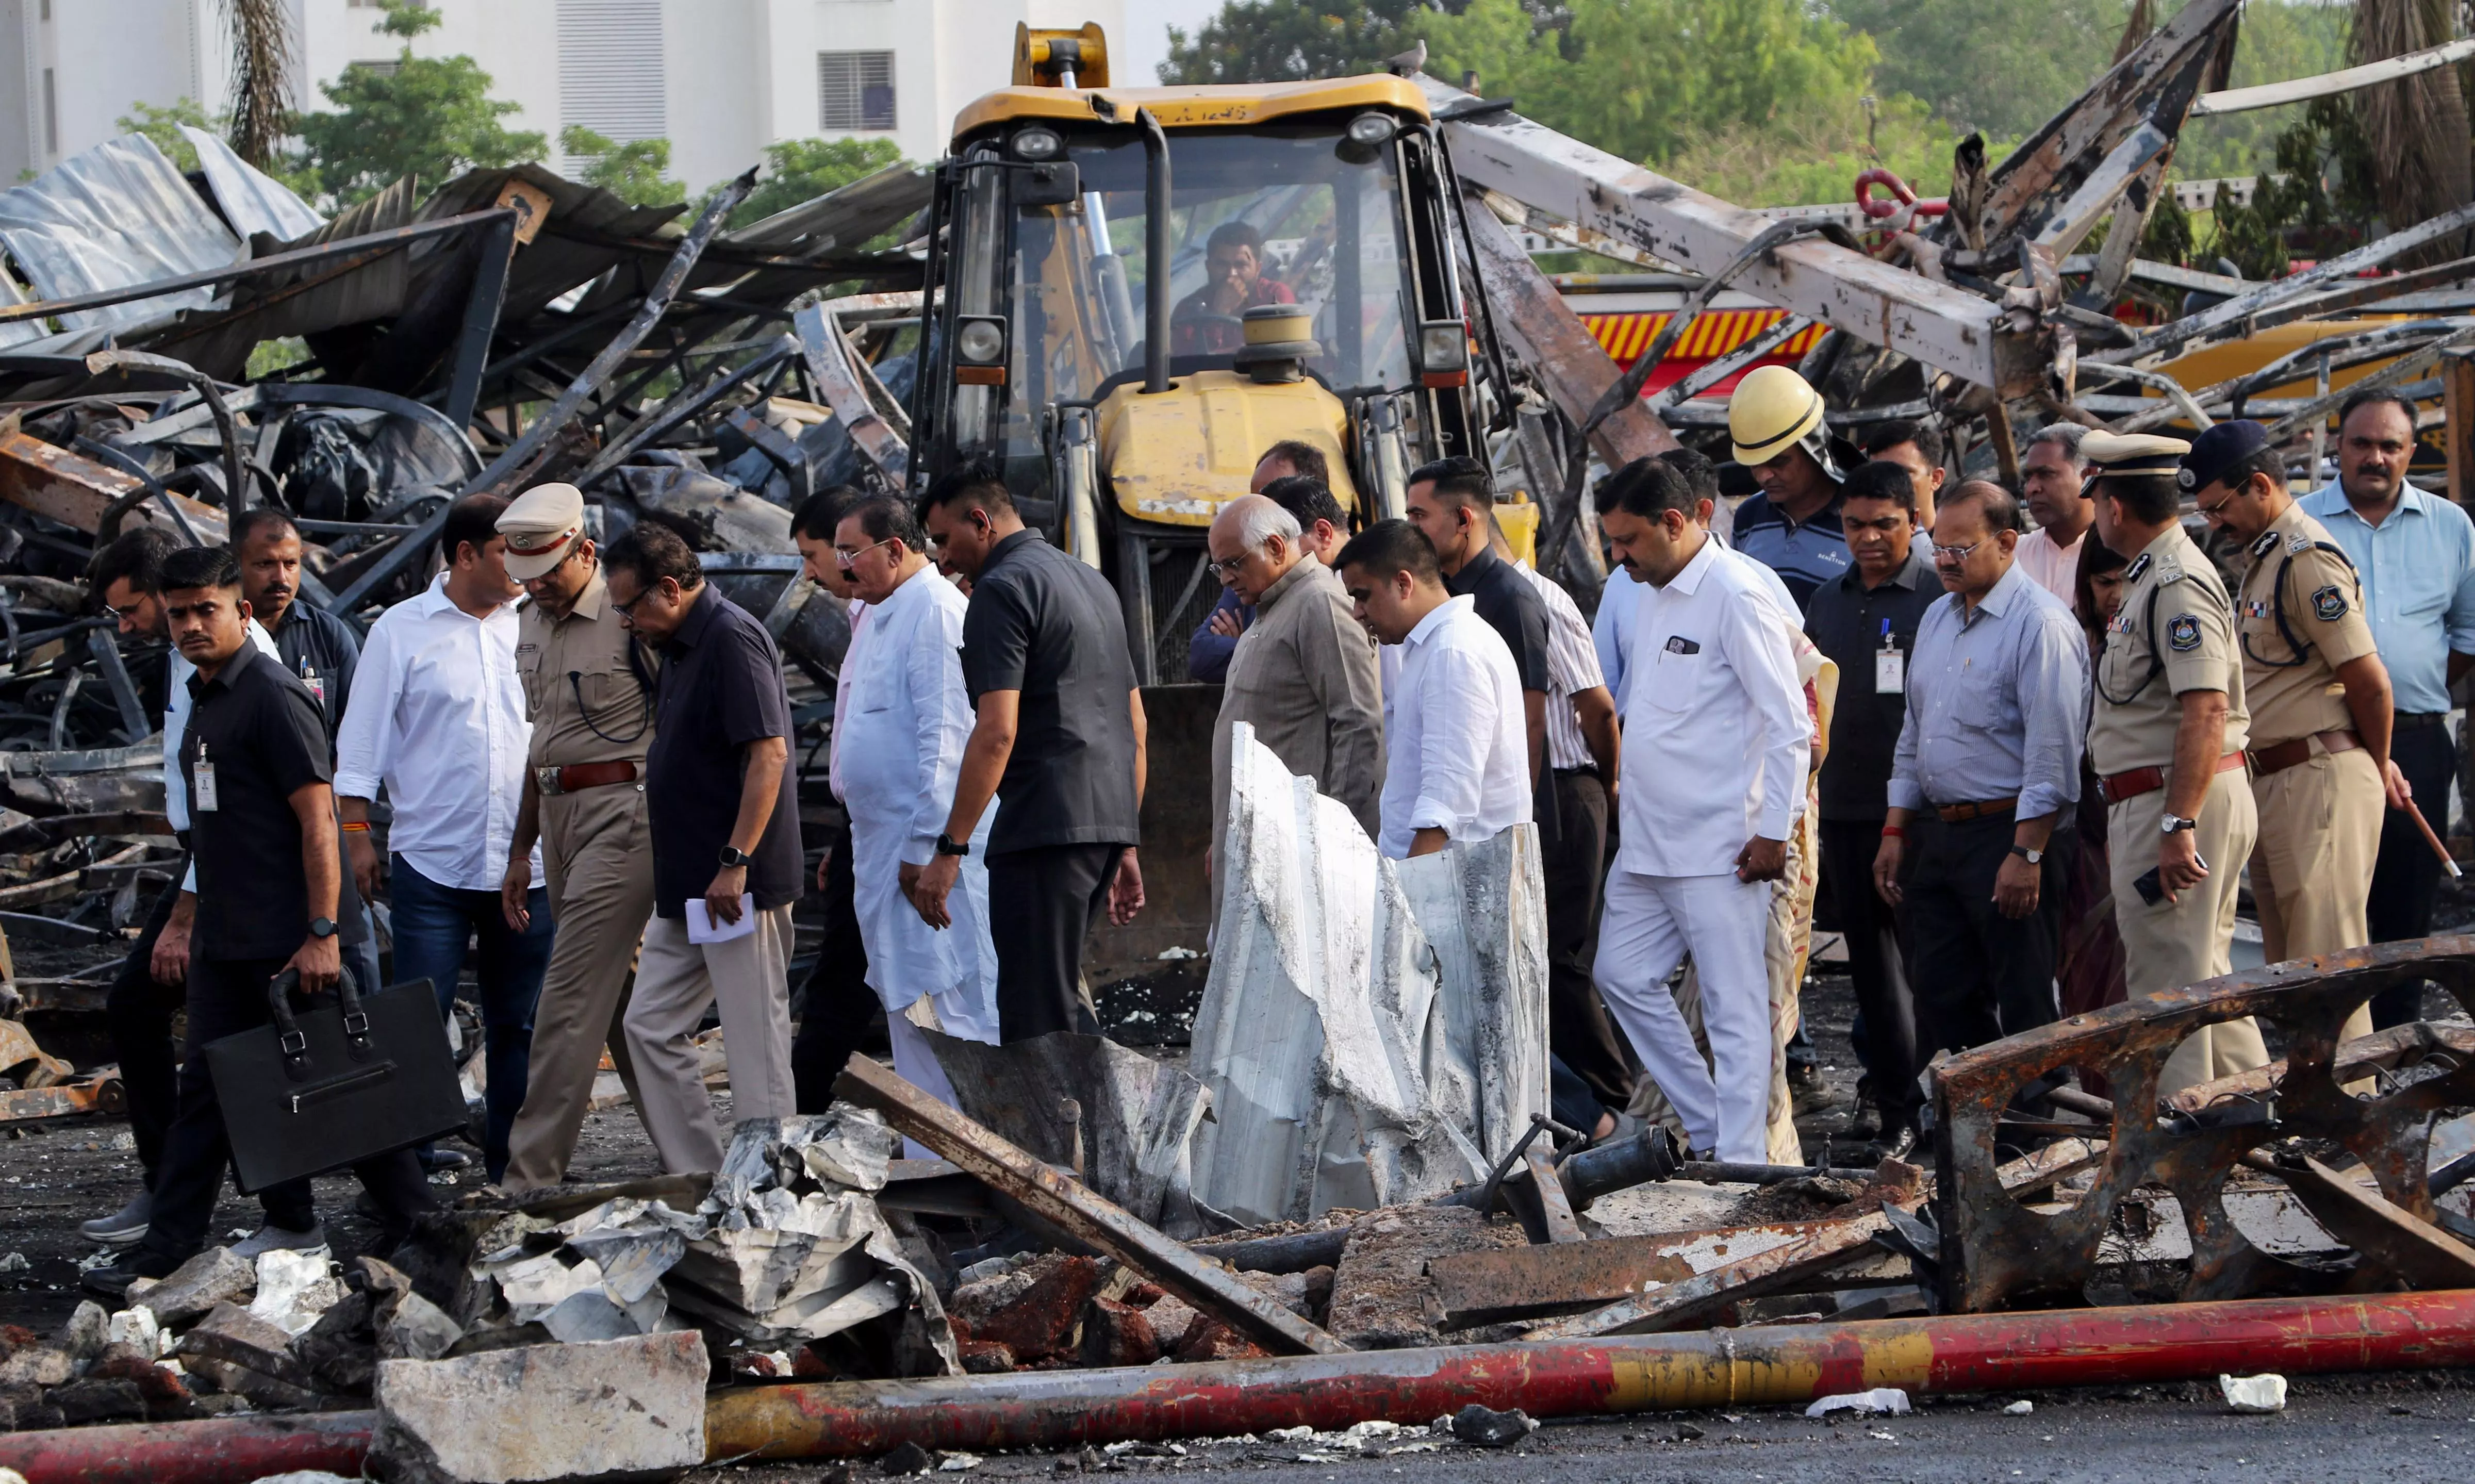 Gujarat game zone fire: Family loses five members; newlyweds among victims